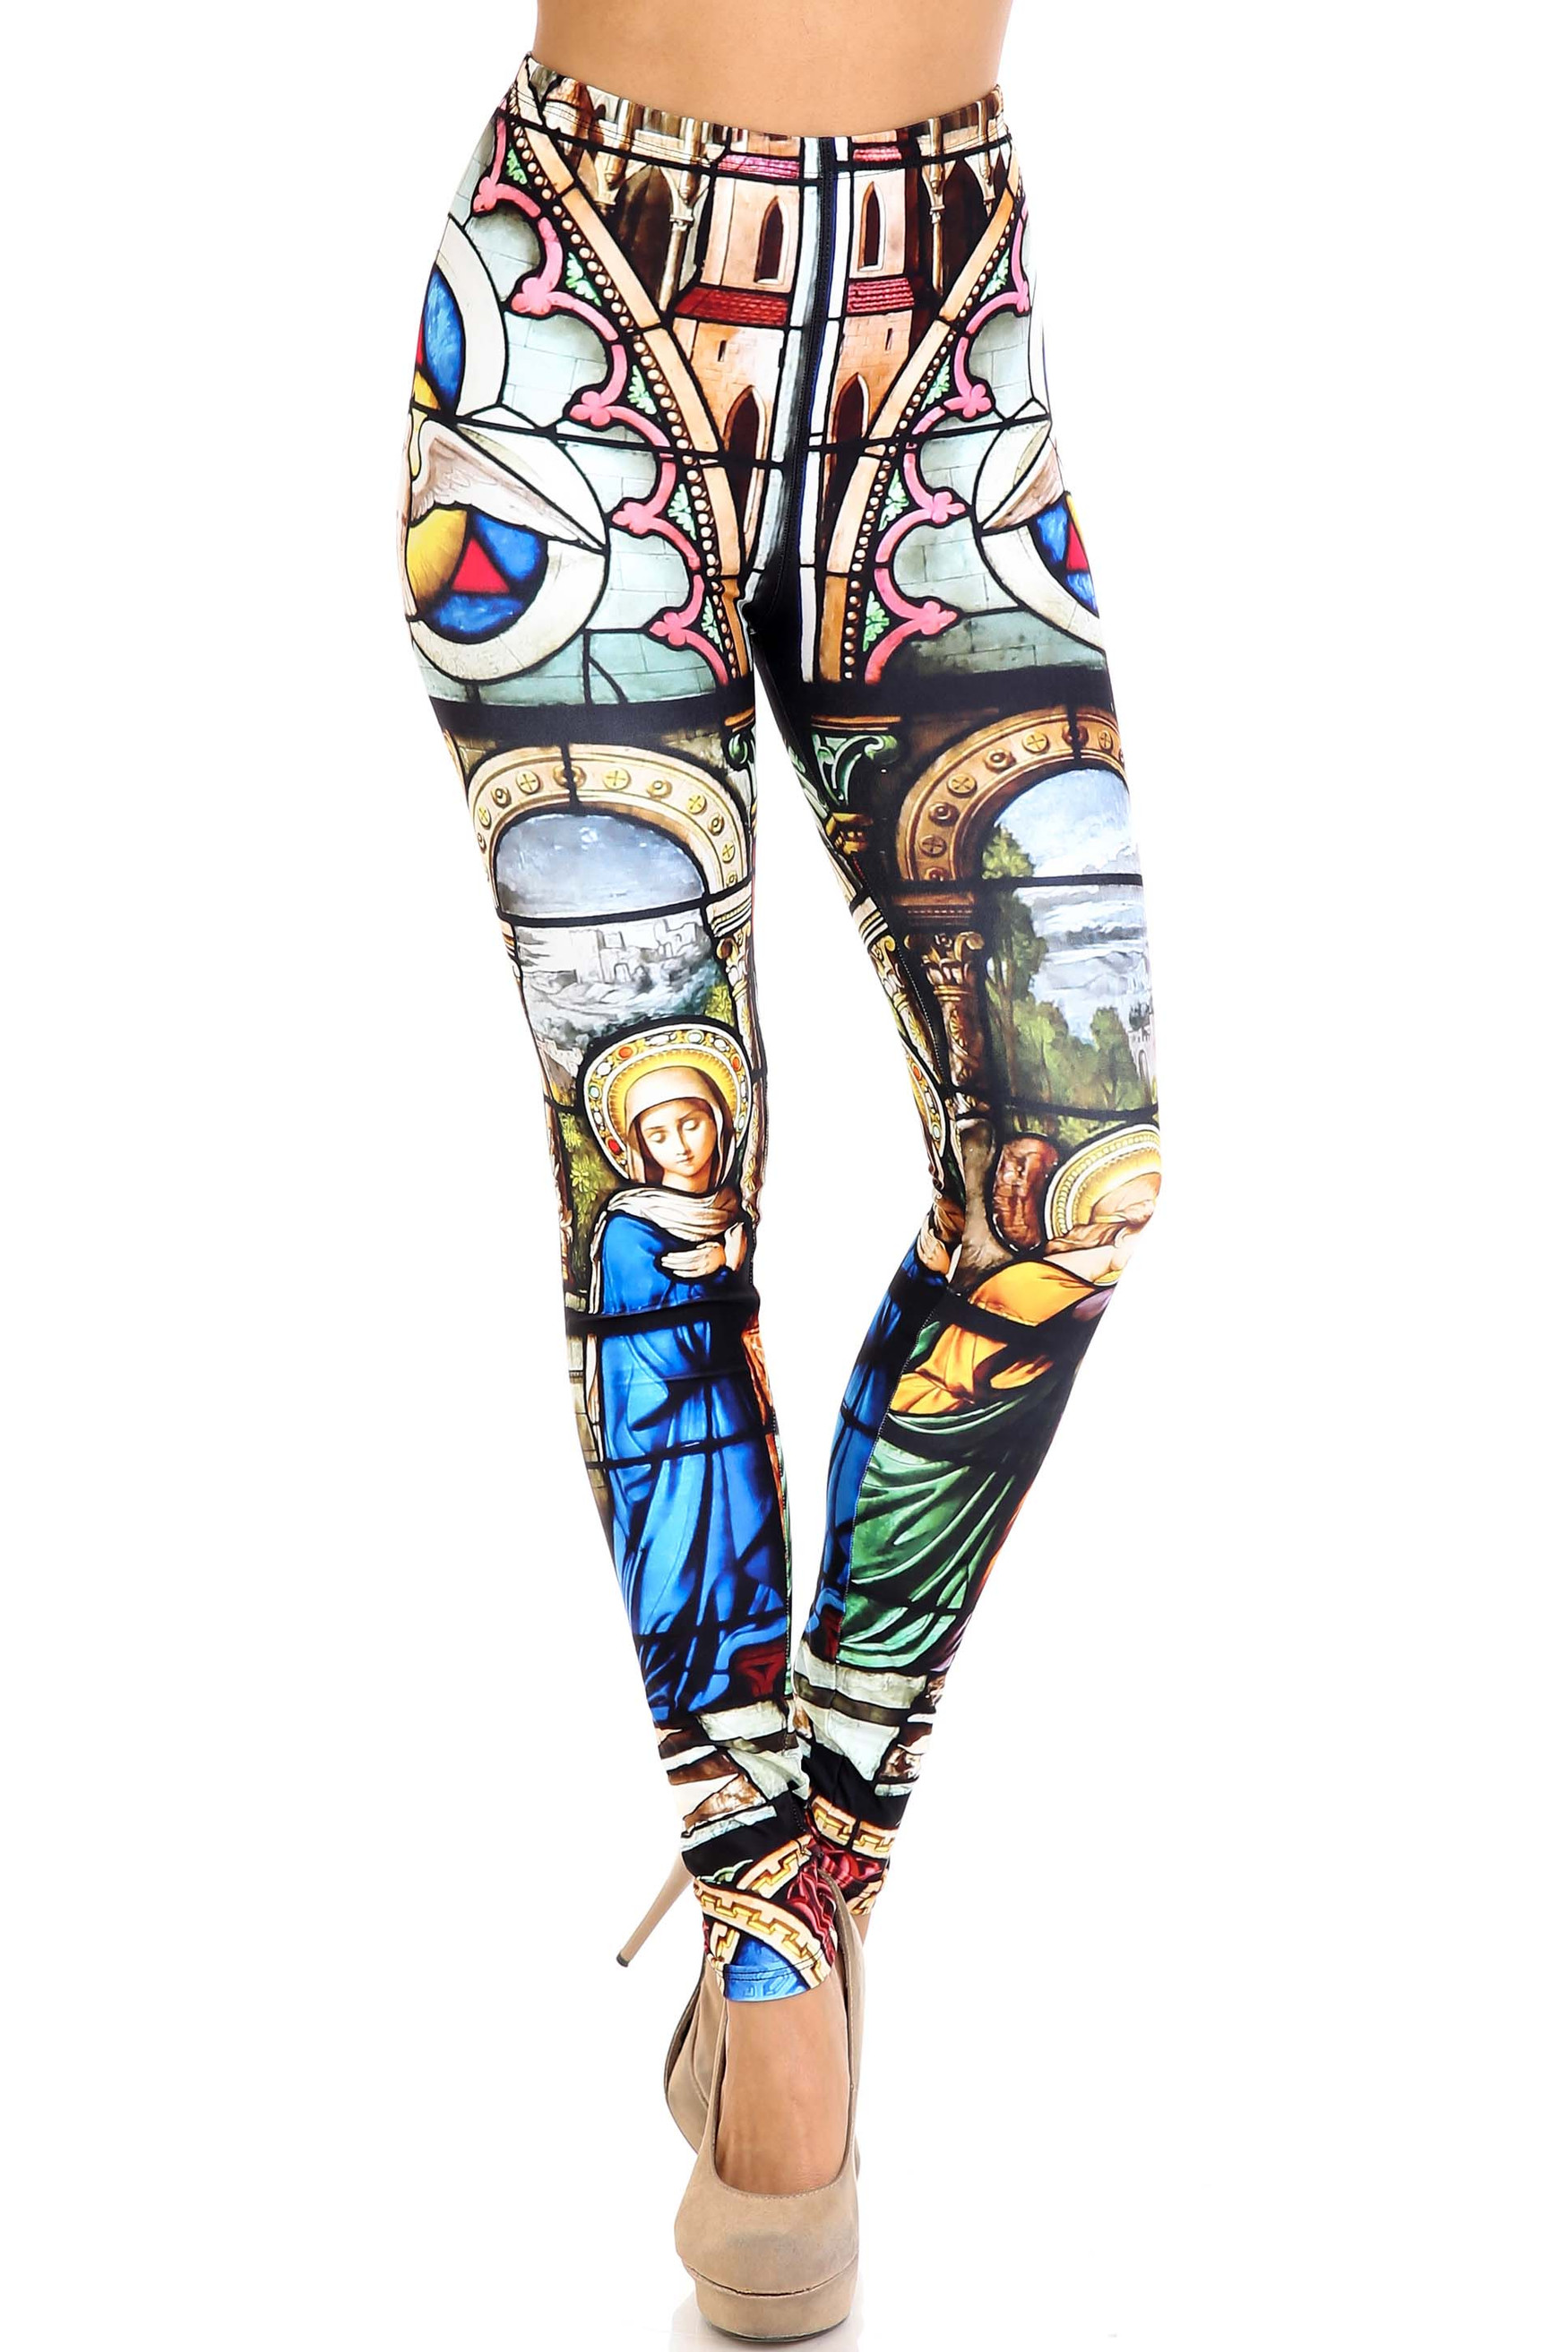 Creamy Soft Stained Glass Cathedral Extra Plus Size Leggings - 3X-5X - USA Fashion™